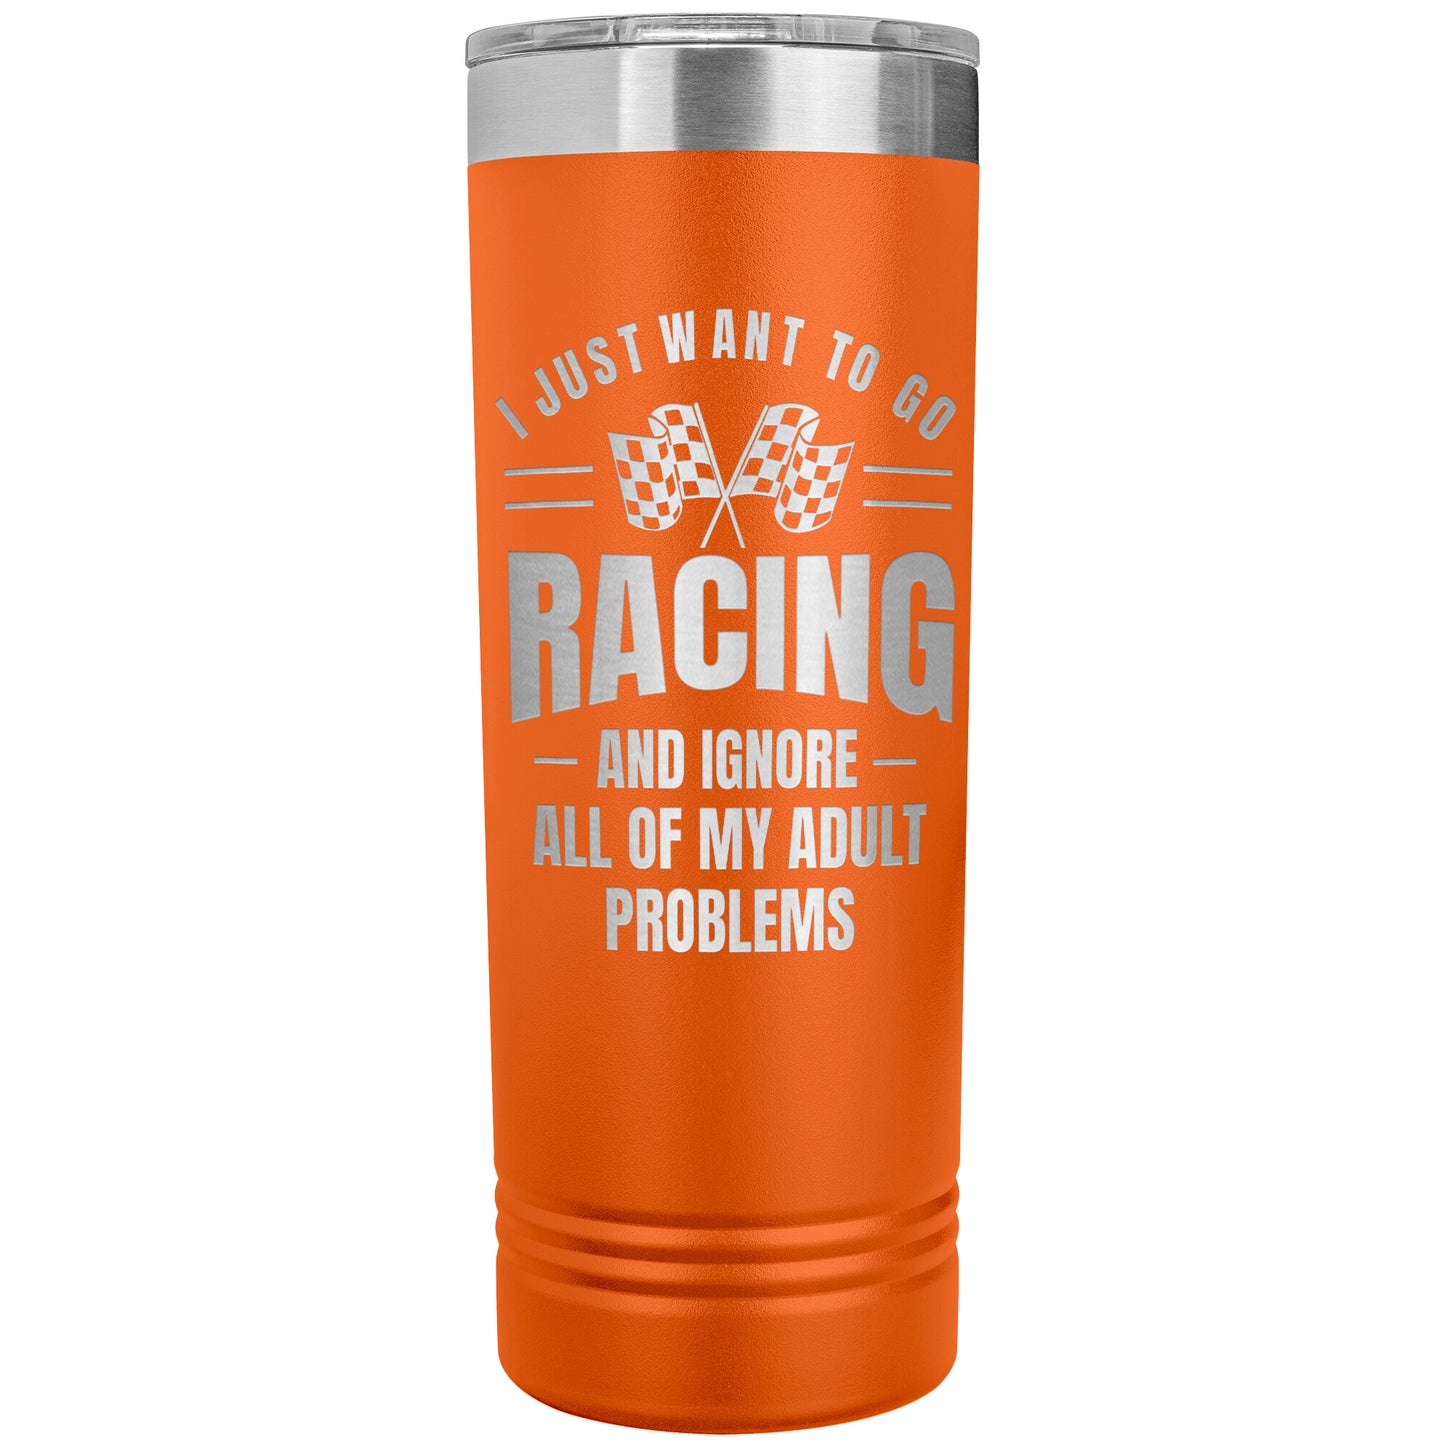 I Just Want To Go Racing 22oz Skinny Tumbler